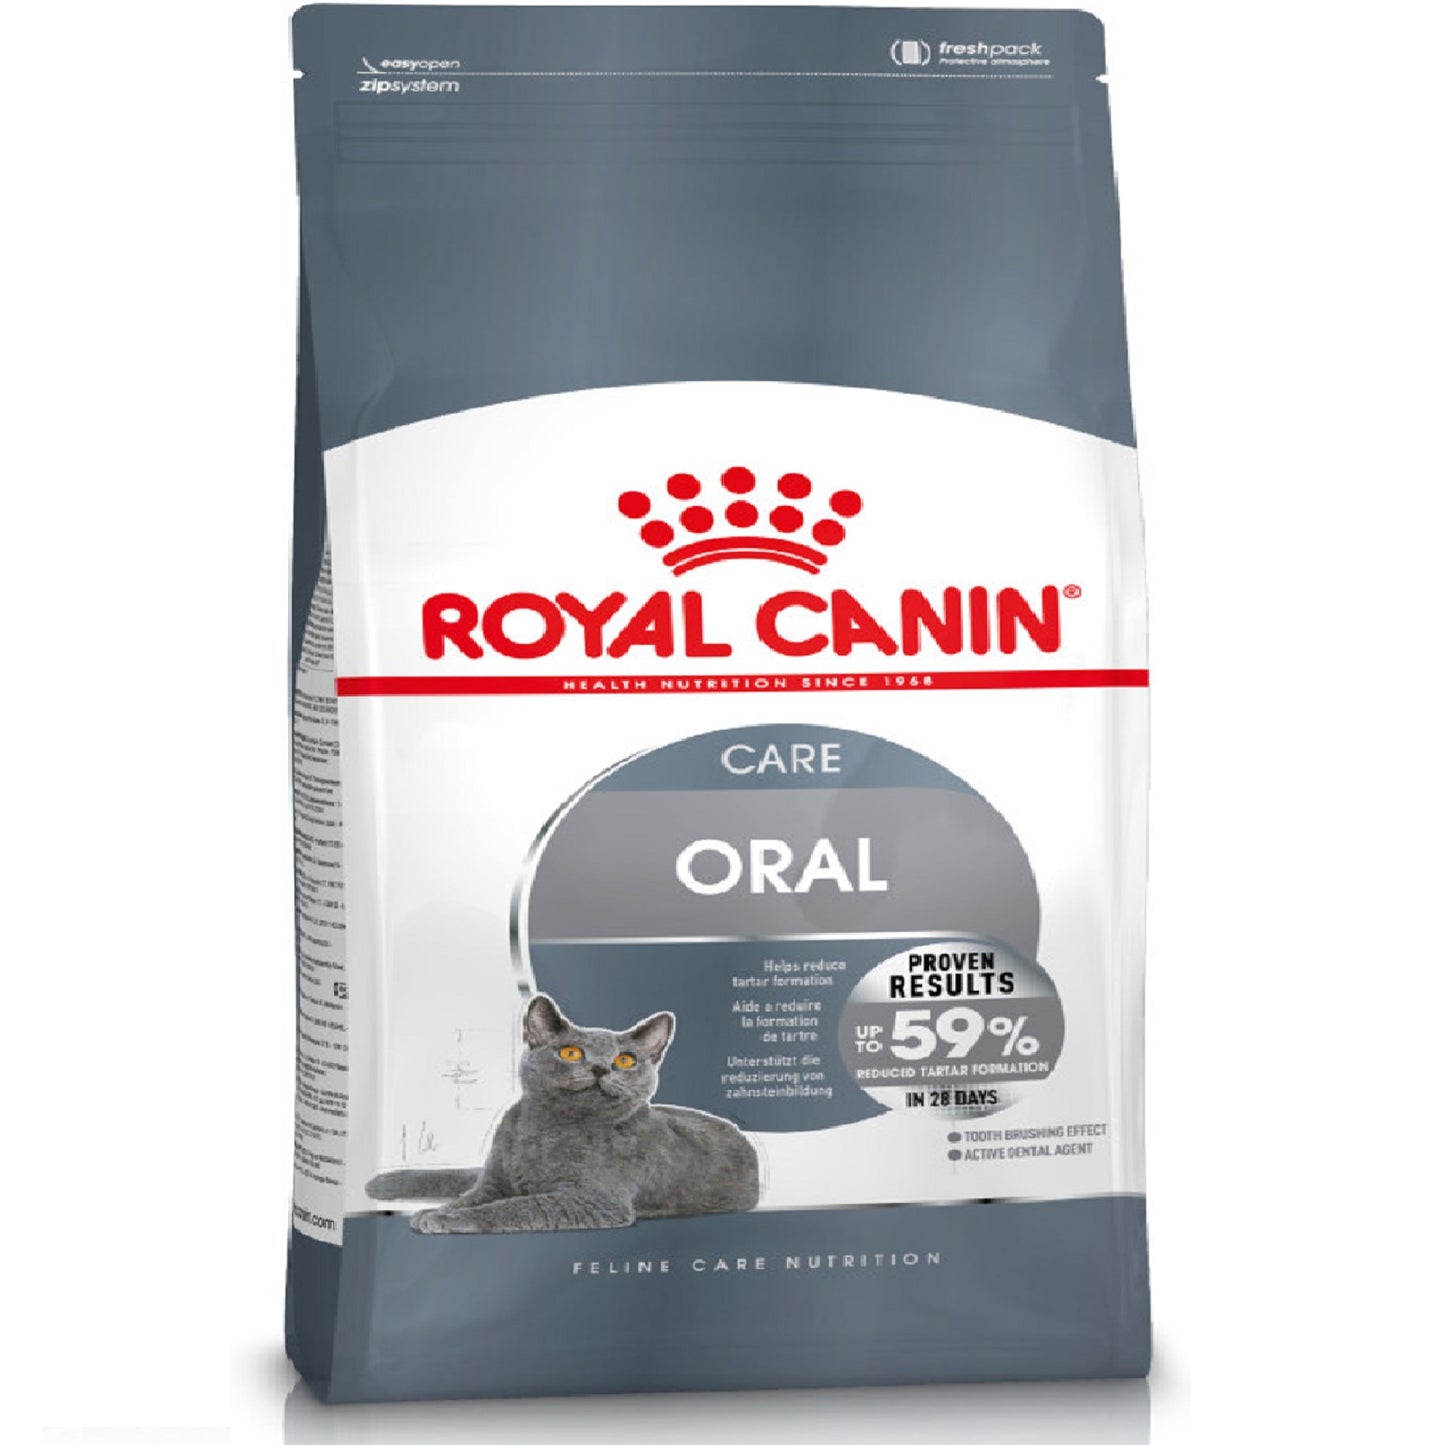 ROYAL CANIN - Oral Care